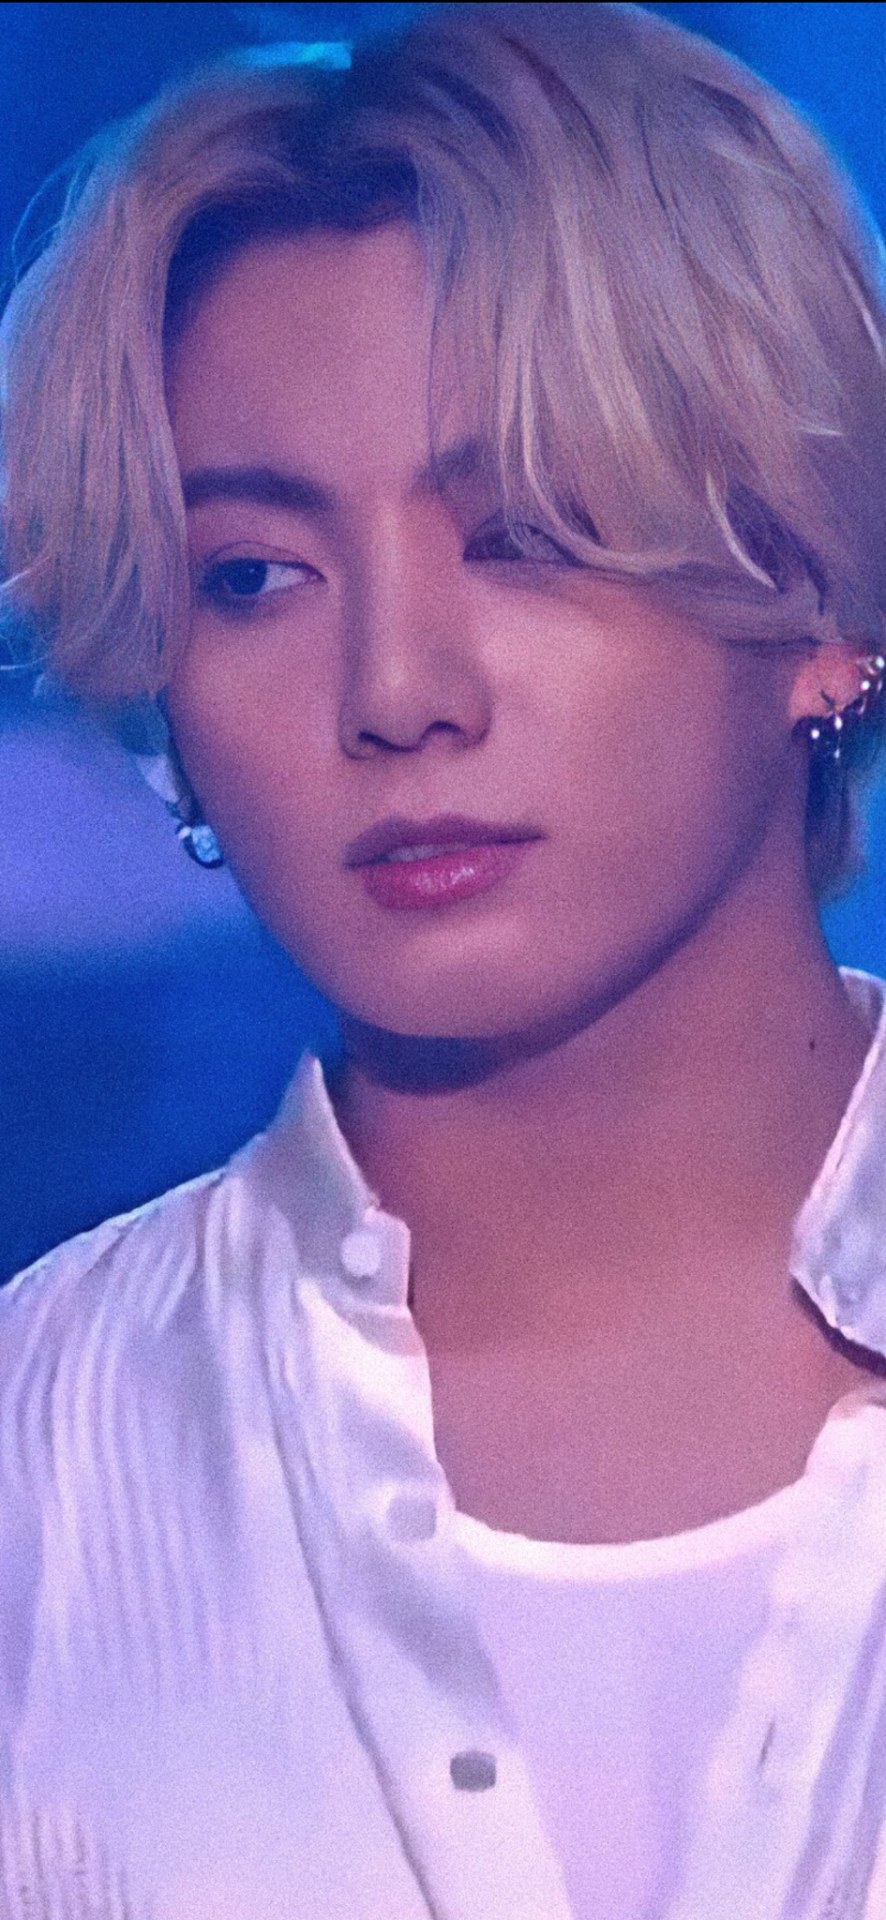 Featured image of post Bts Jungkook Blonde Hair 2021 Wallpaper / Last updated 21.01.2021 | 10:03 pm ist.